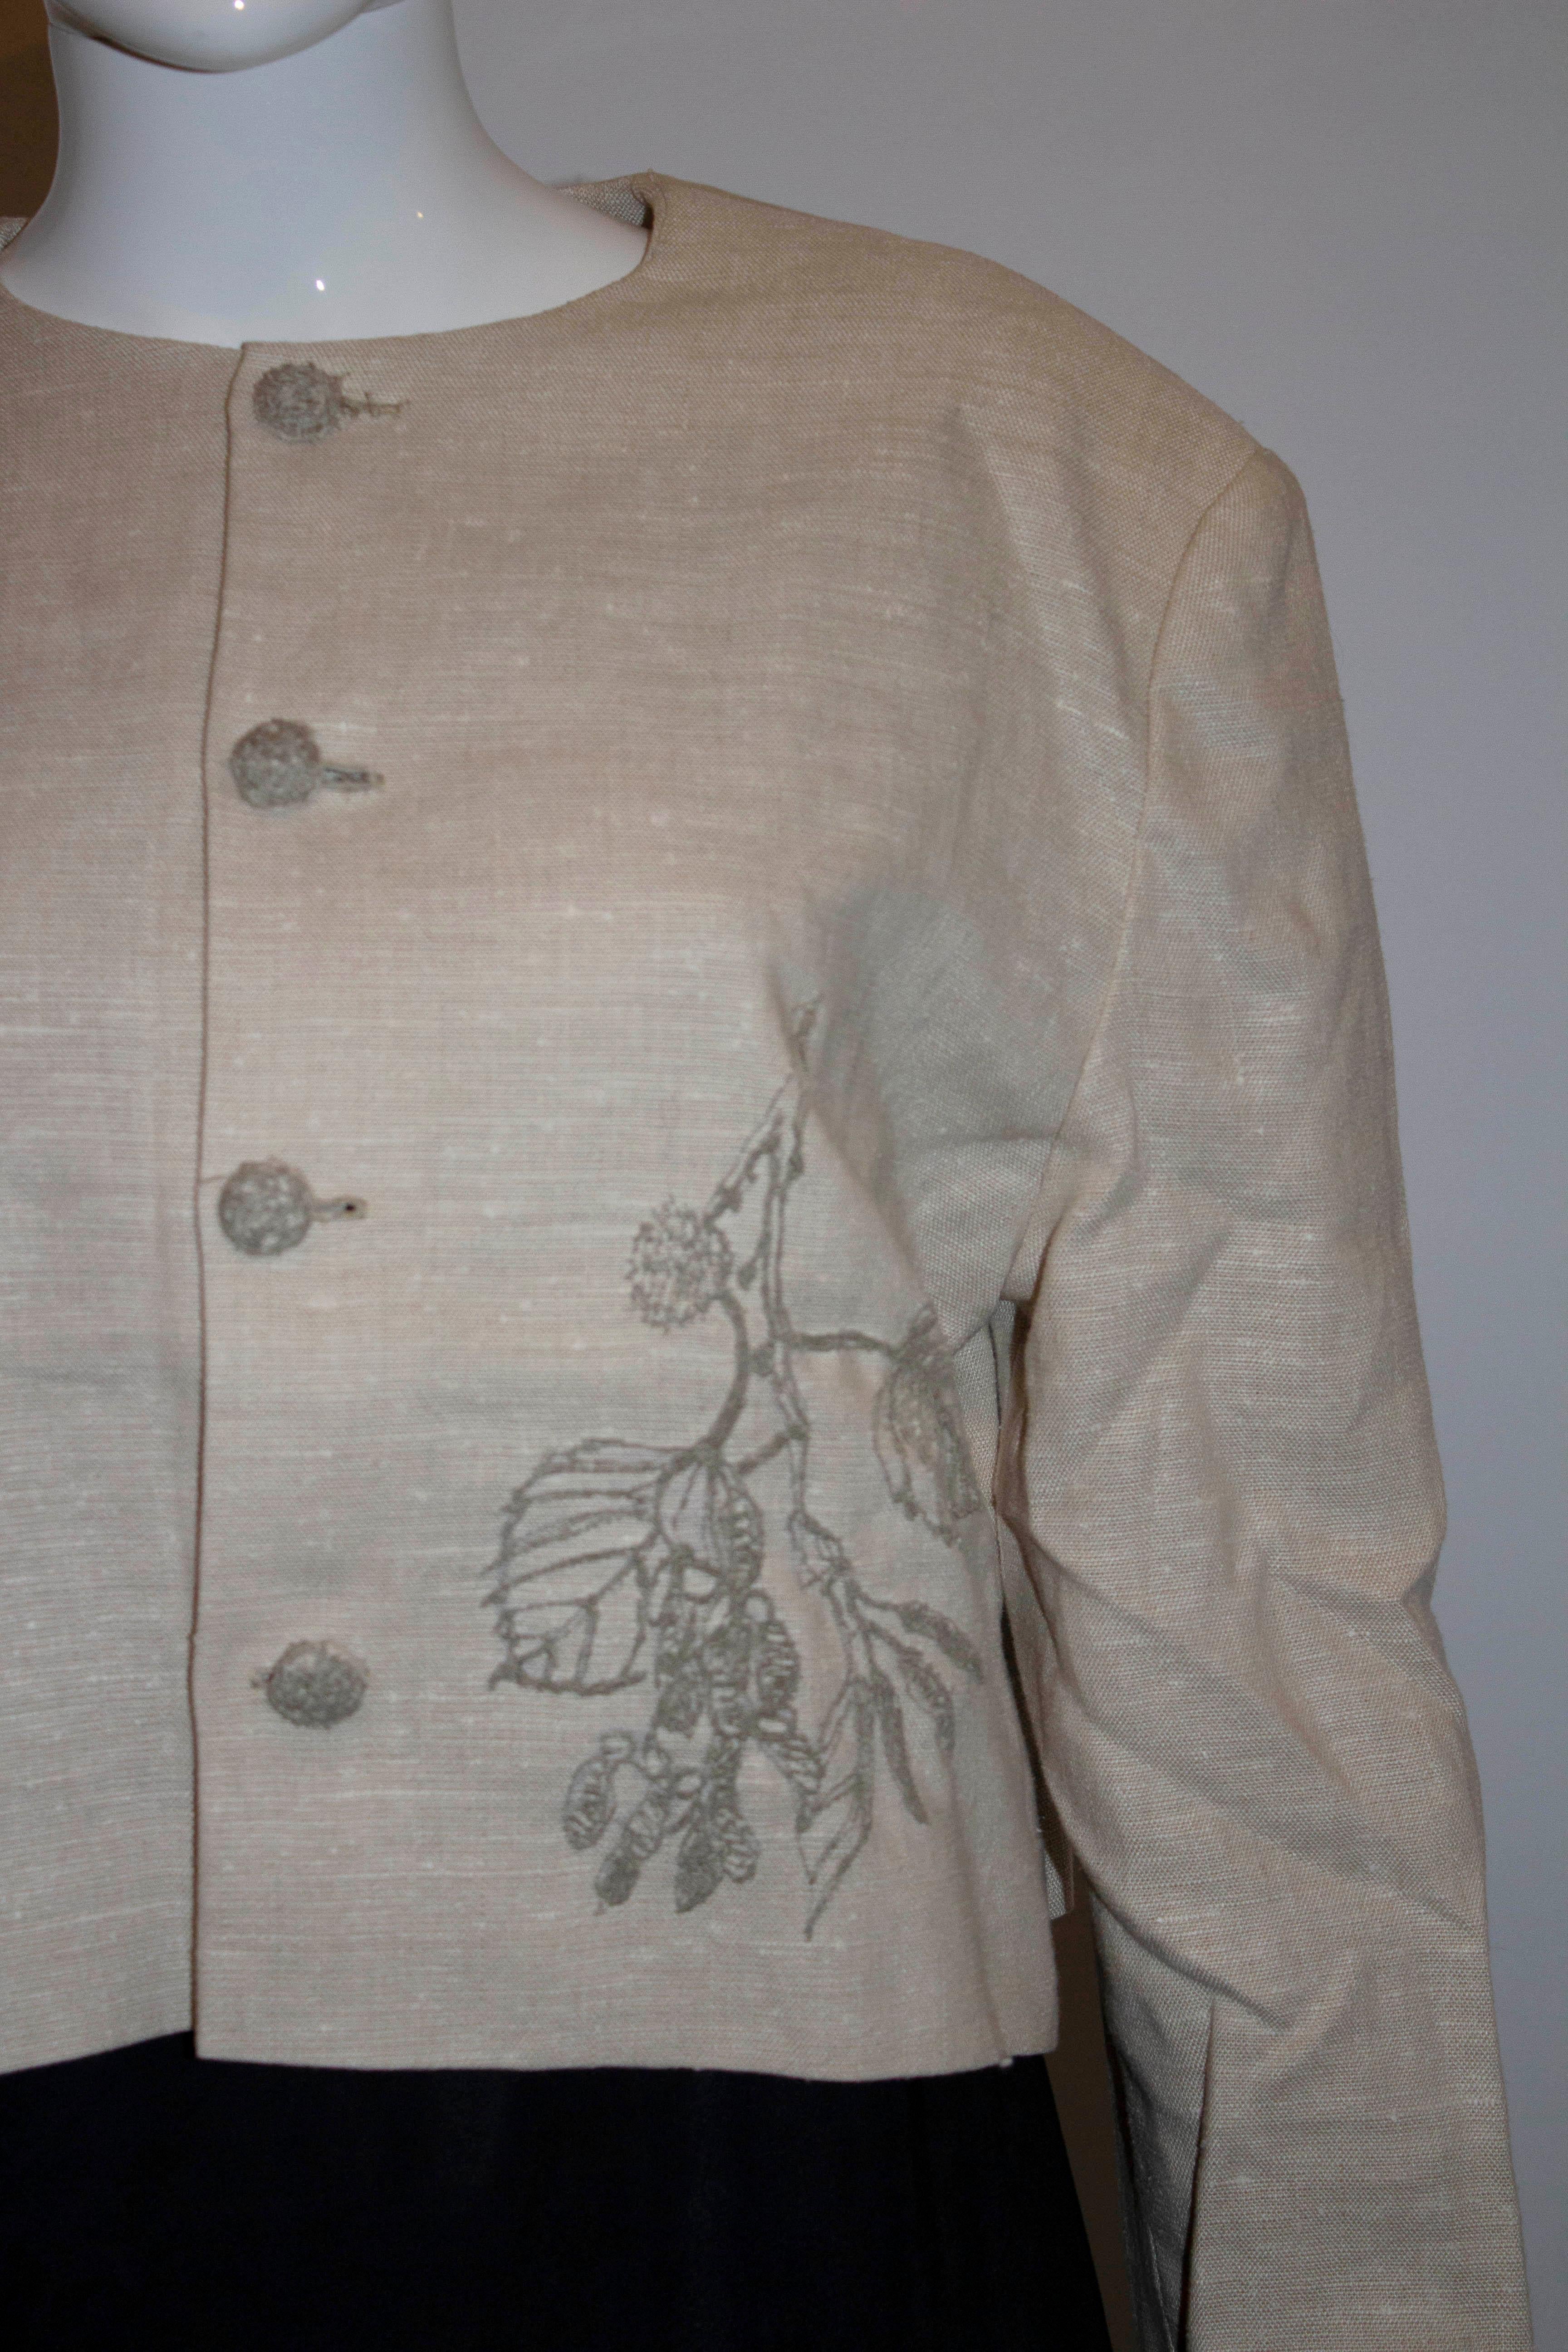 A pretty vintage jacket in a linen mix. The jacket has a round collar and button opening with embroidery detail on the left hand side. It is fully lined. 

Measurements: Bust up to 41'', length 20''
